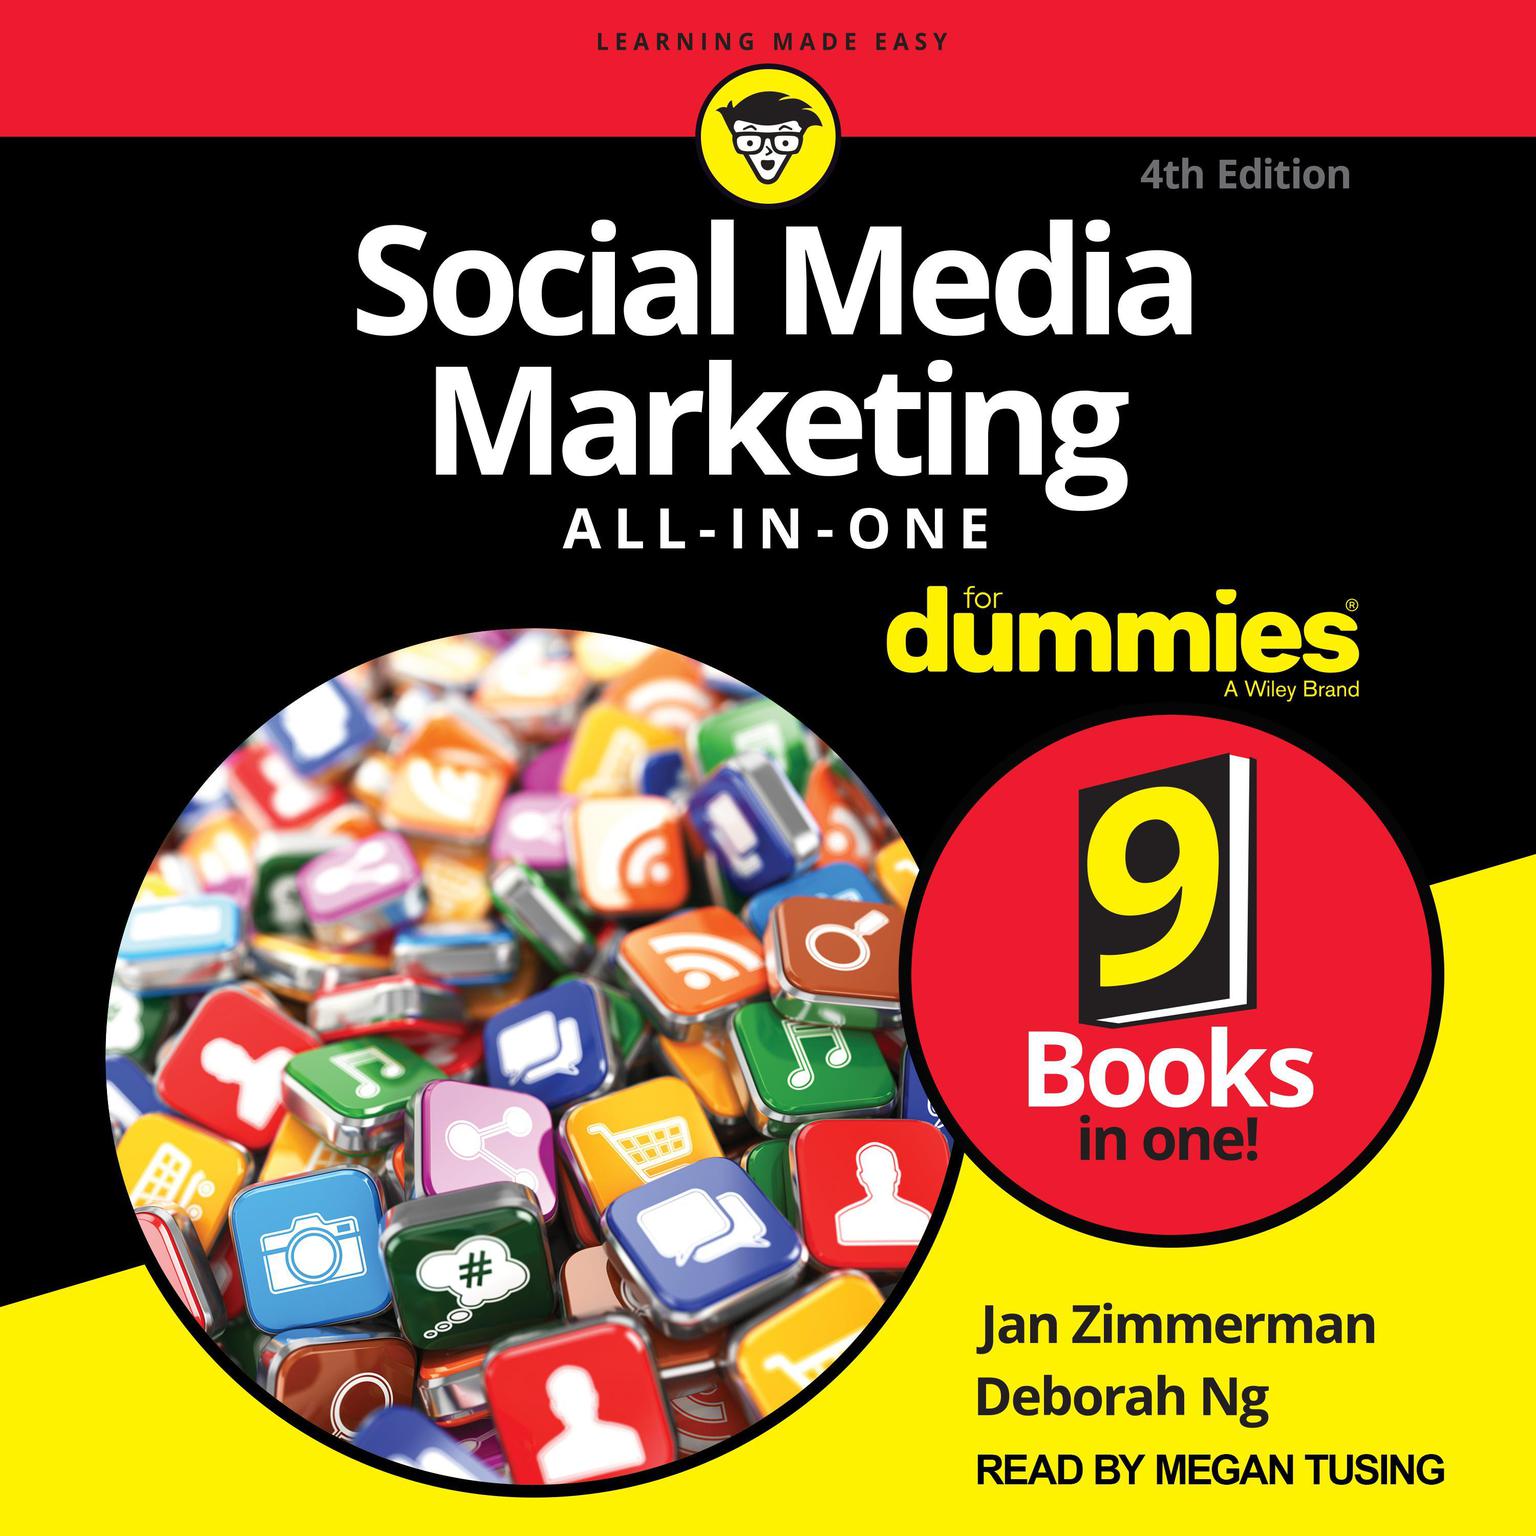 Social Media Marketing All-in-One For Dummies: 4th Edition Audiobook, by Jan Zimmerman